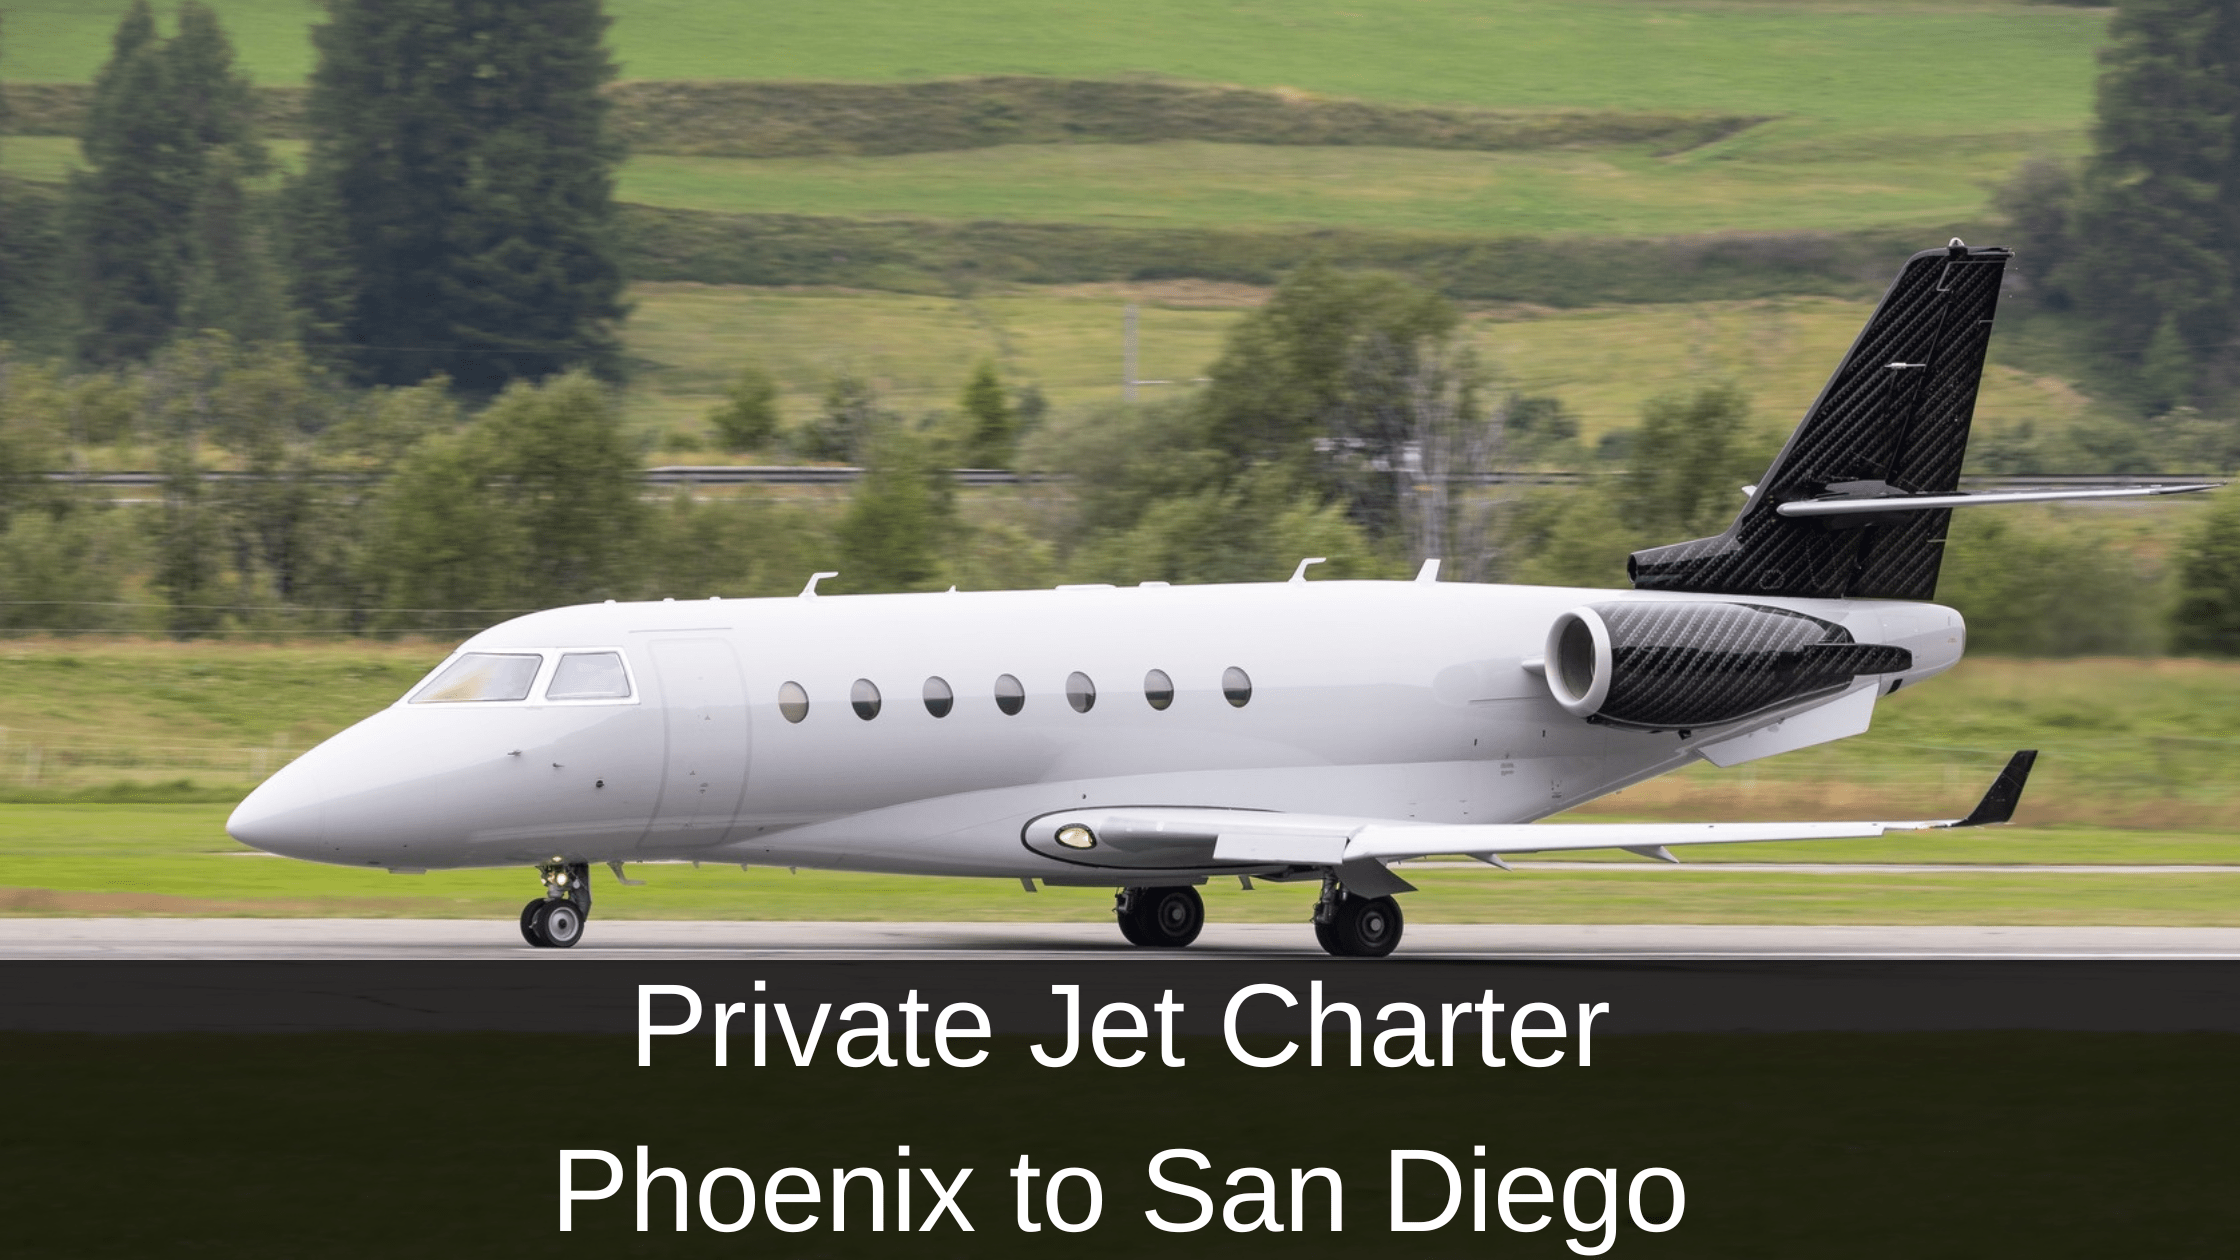 Private Jet Charter Phoenix to San Diego